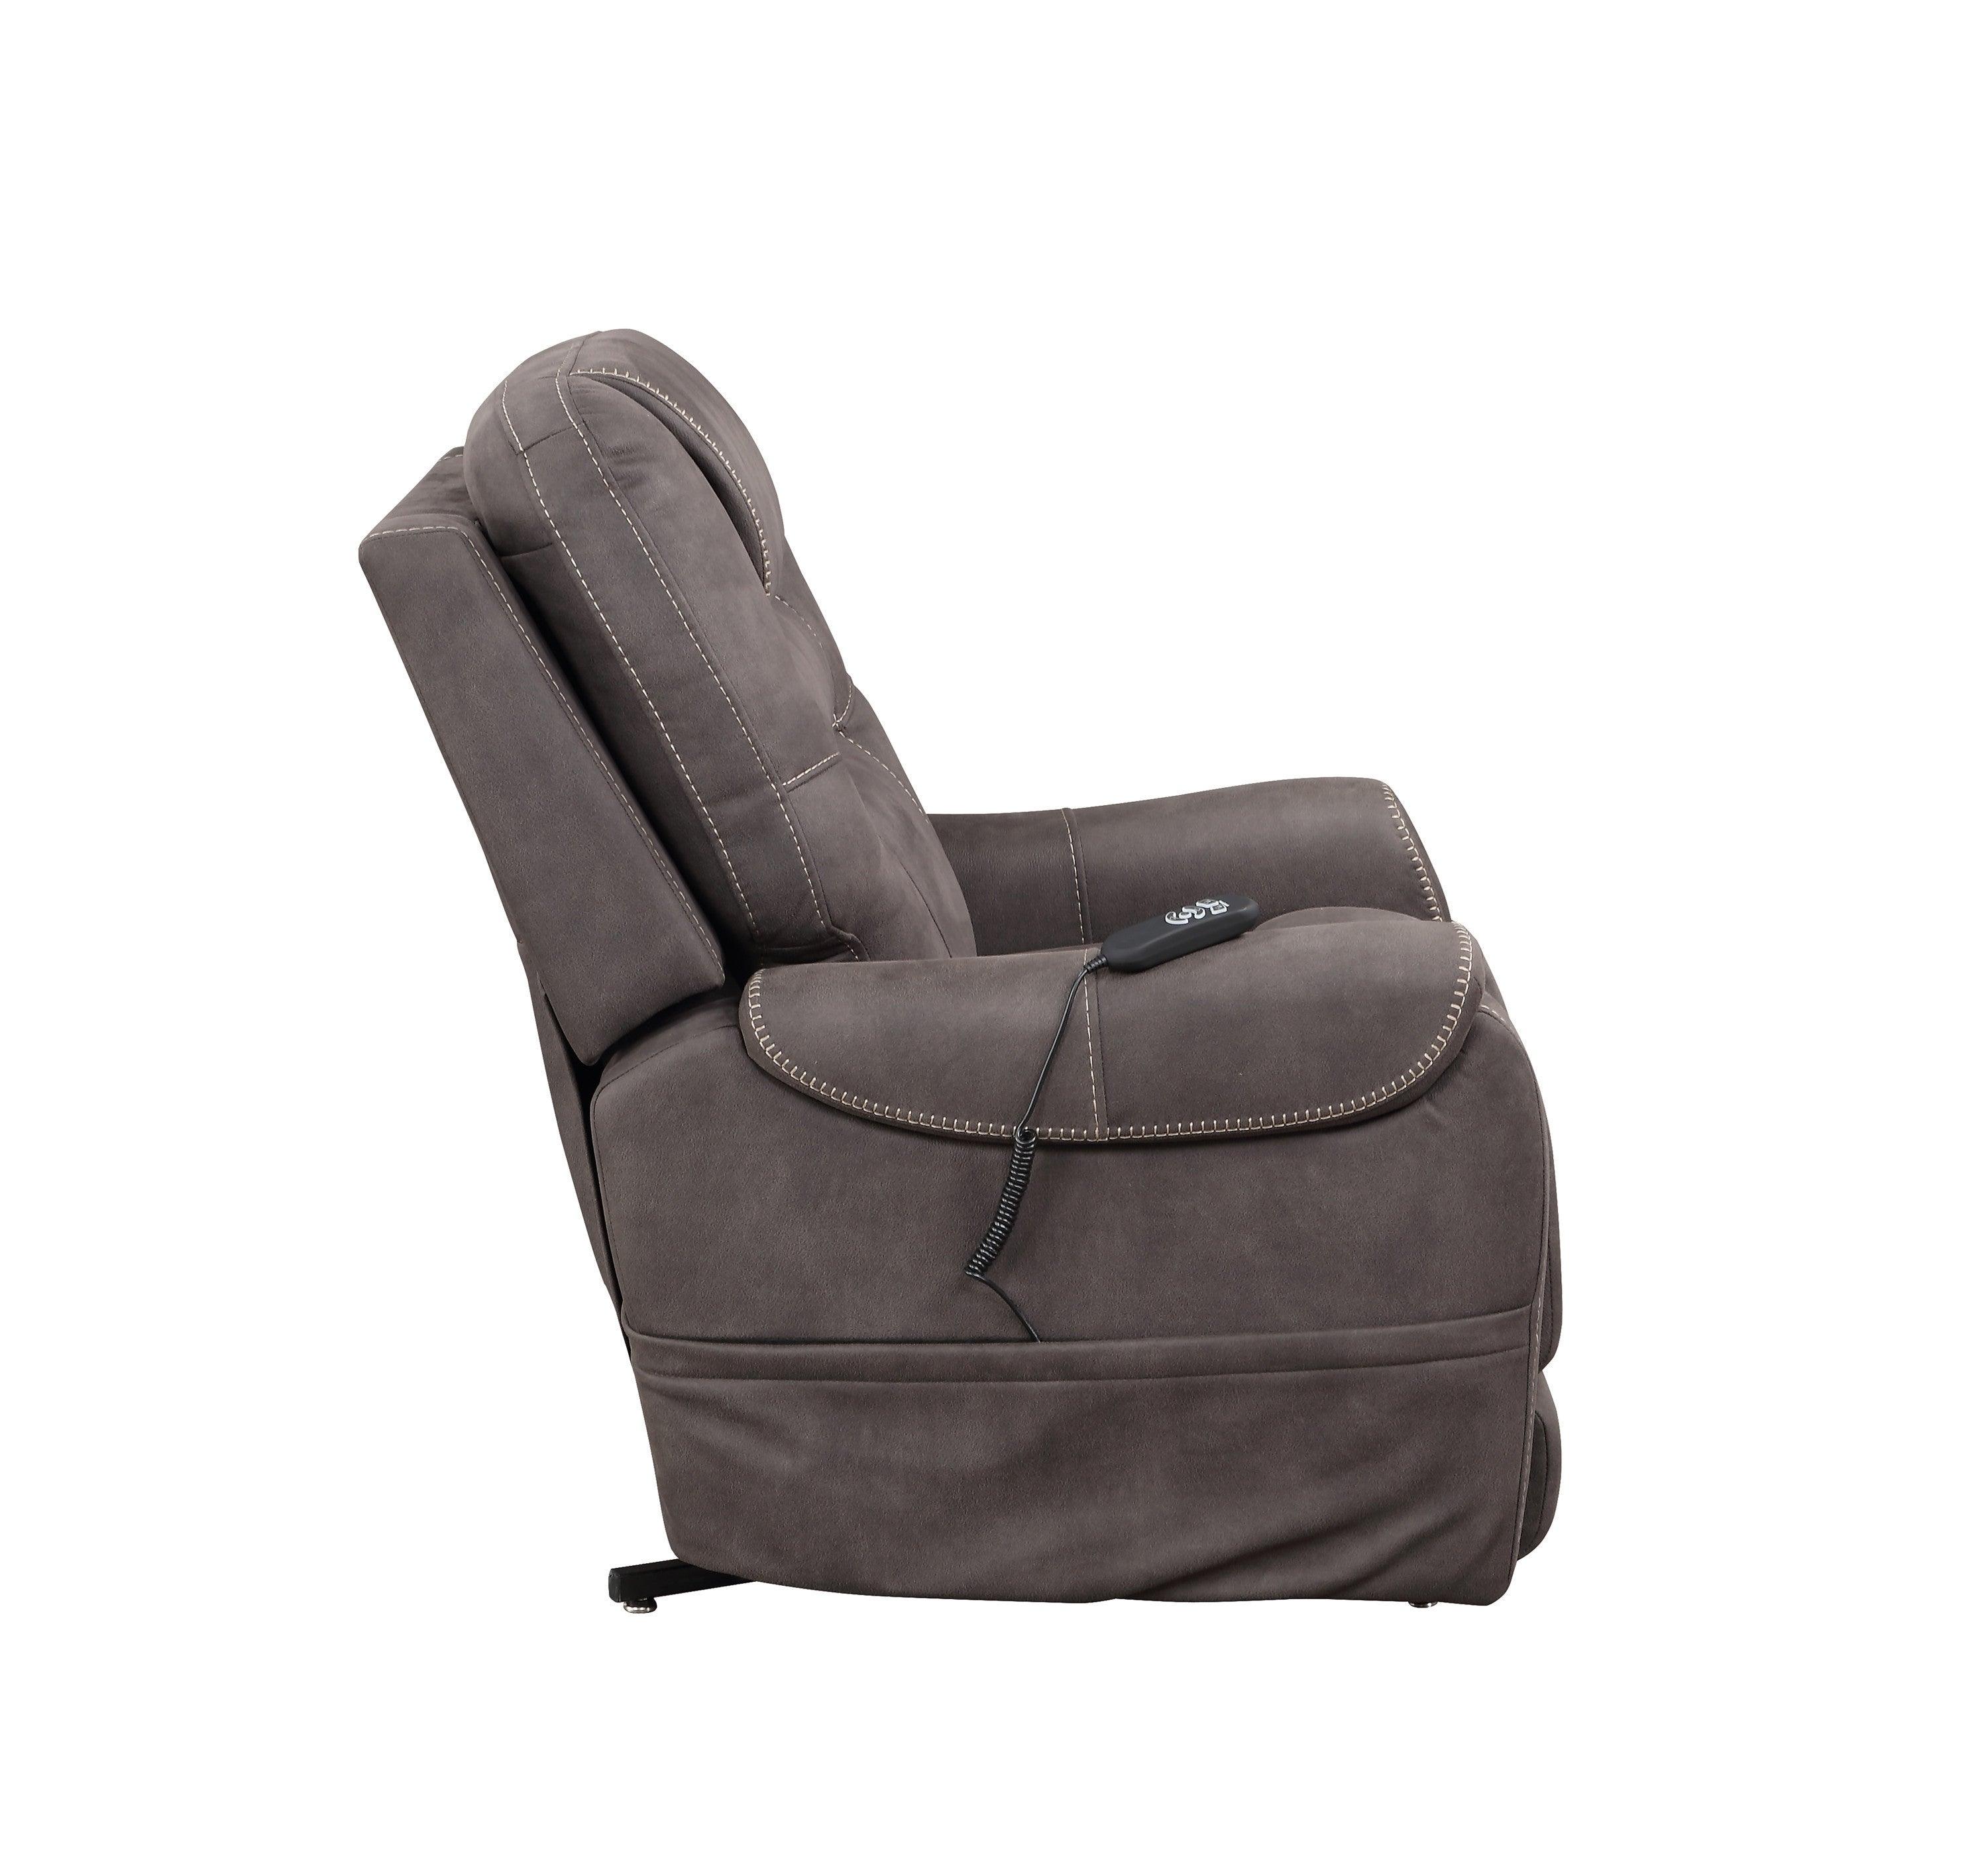 Power Lift Recliner Chair with Zoned Heat and Adjustable Headrest, seated side view